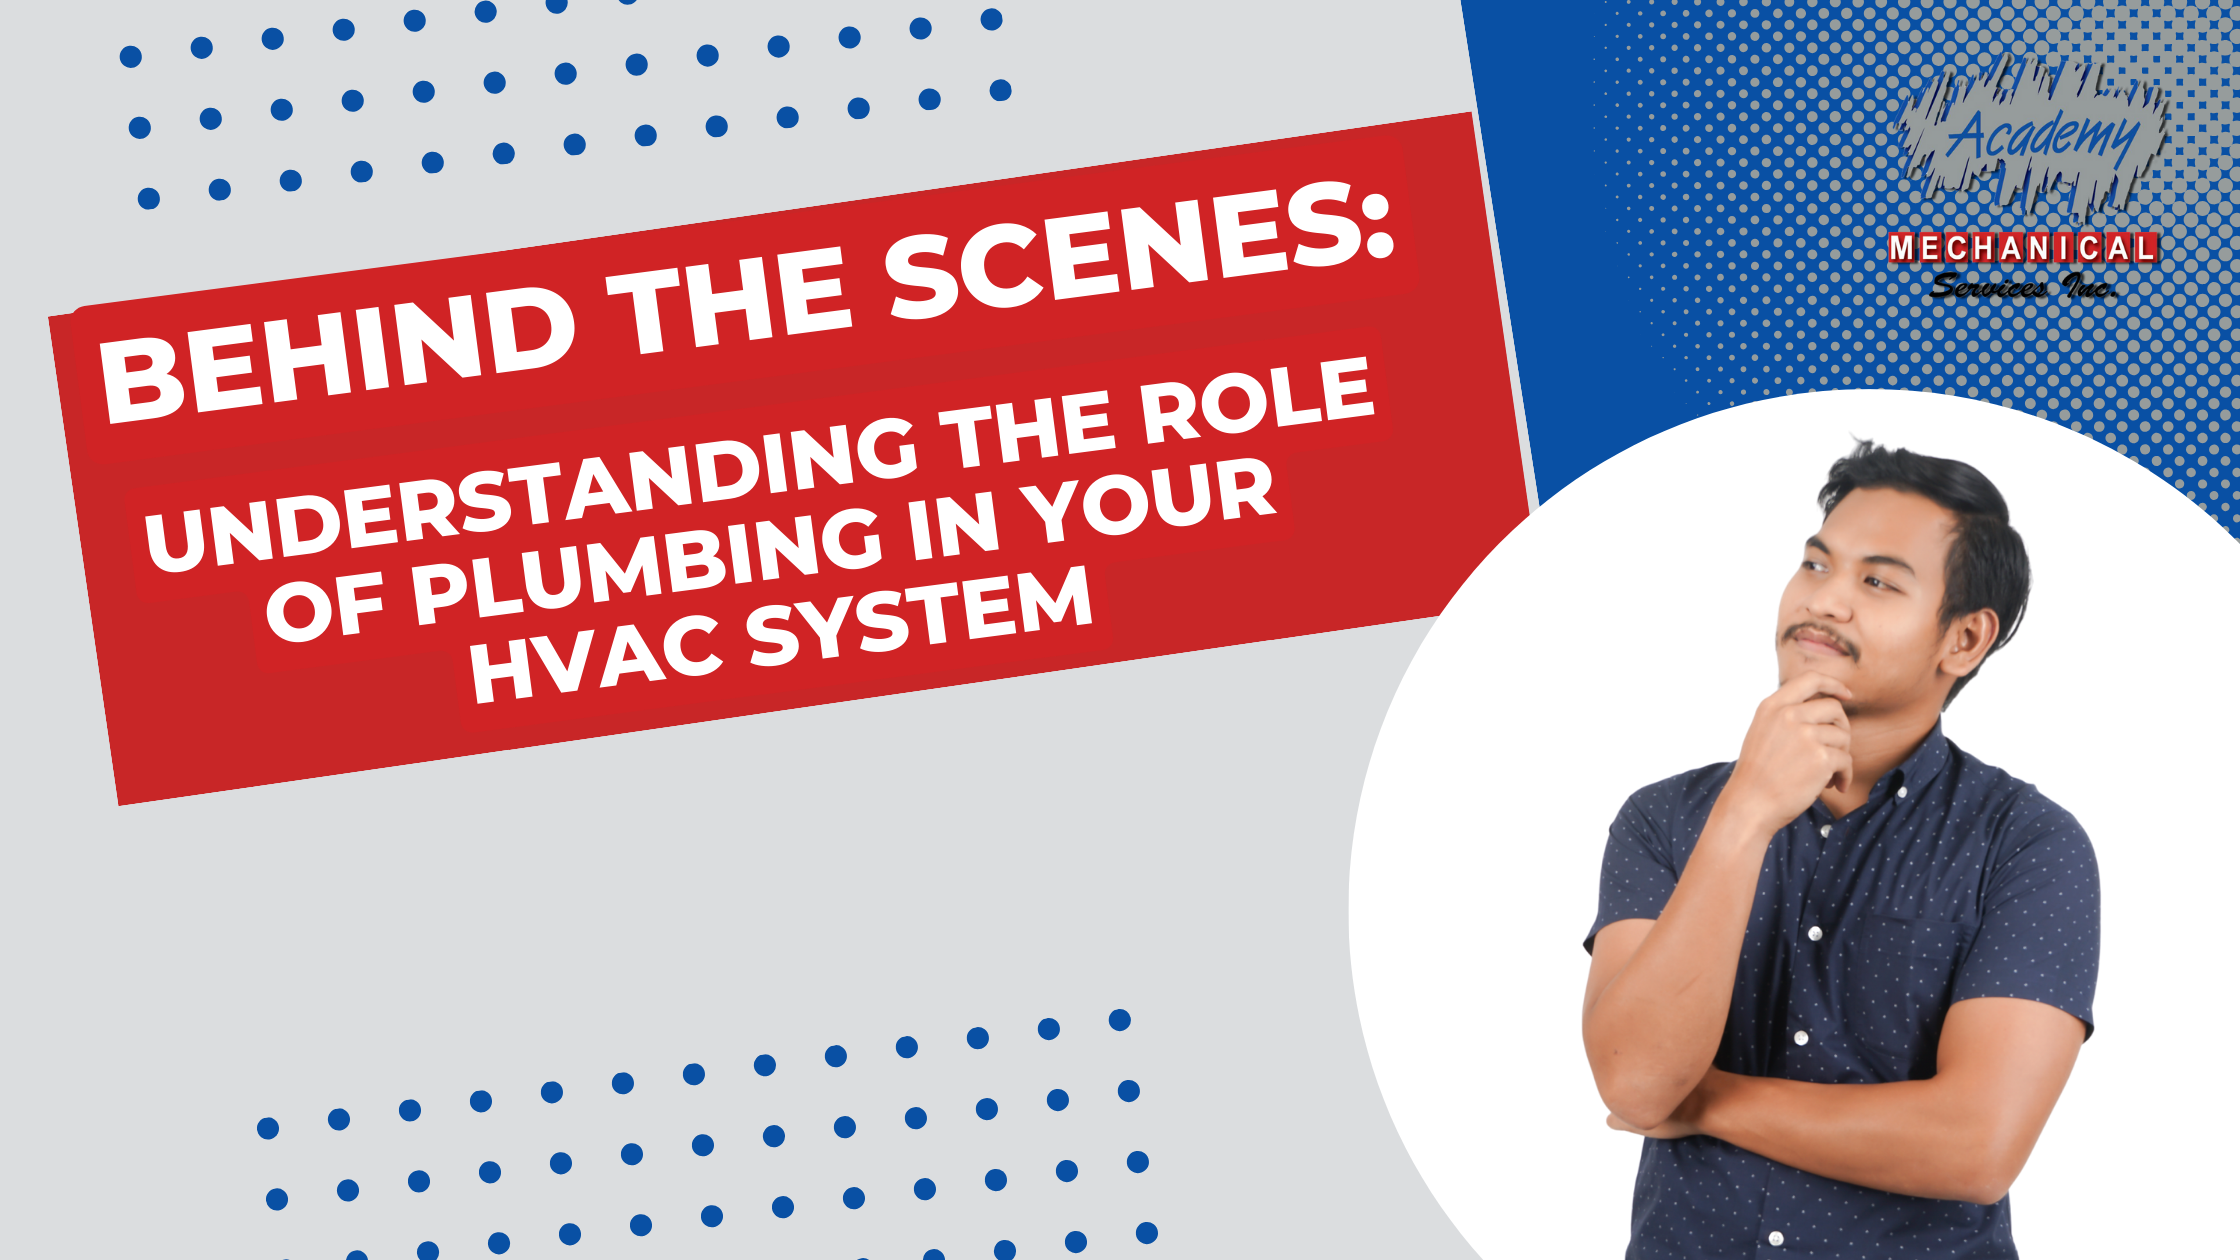 You are currently viewing Behind the Scenes: Understanding the Role of Plumbing in HVAC Systems